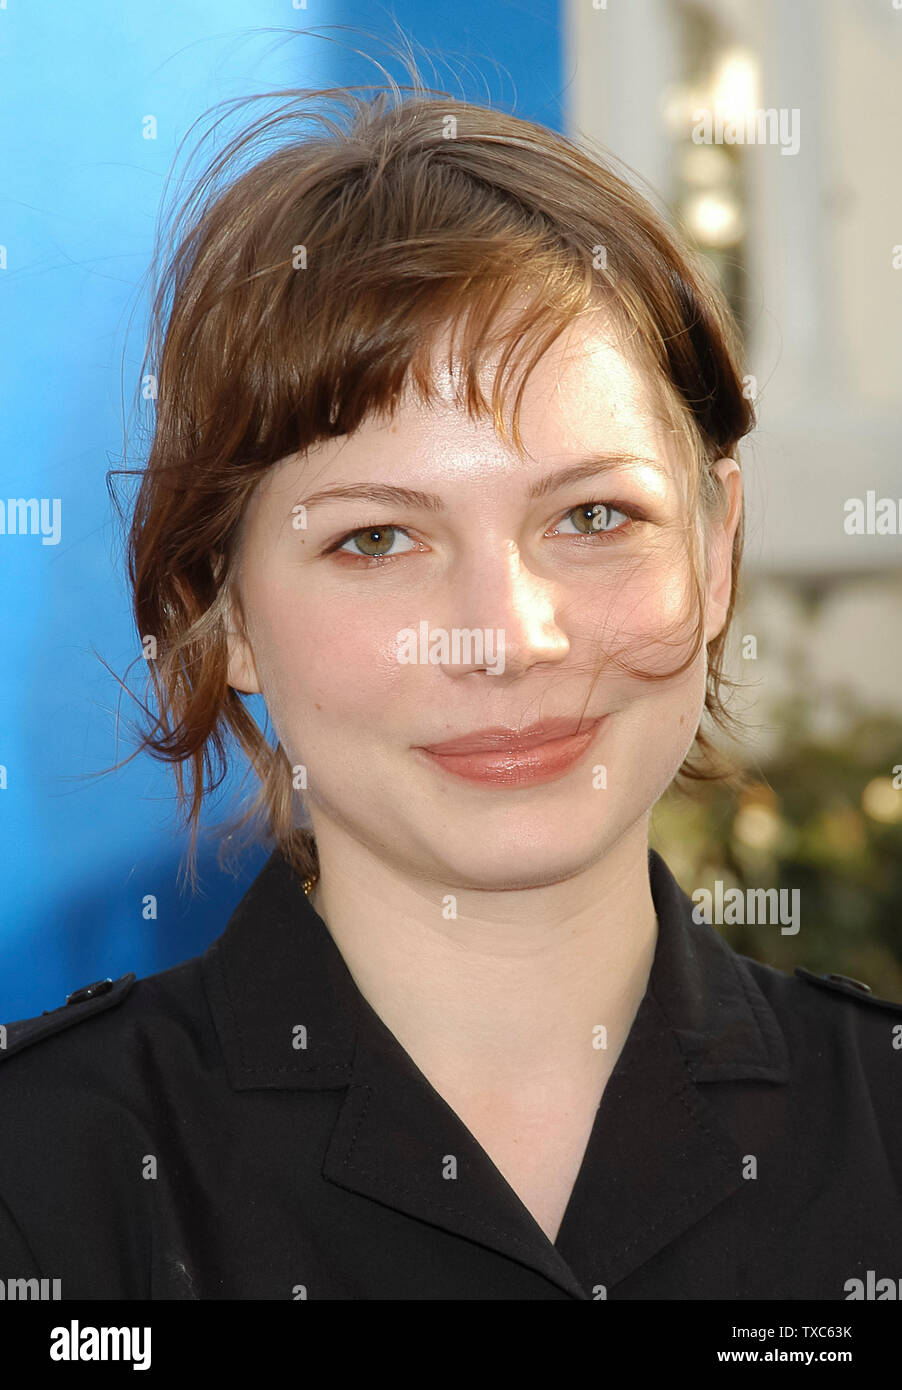 Michelle Williams at the IFC/Target Independent Spirit Awards After Party at Shutters on the Beach in Santa Monica, CA. The event took place on Saturday, February 28, 2004. Photo by: SBM / PictureLux  -  File Reference # 33790-5152SMBPLX Stock Photo